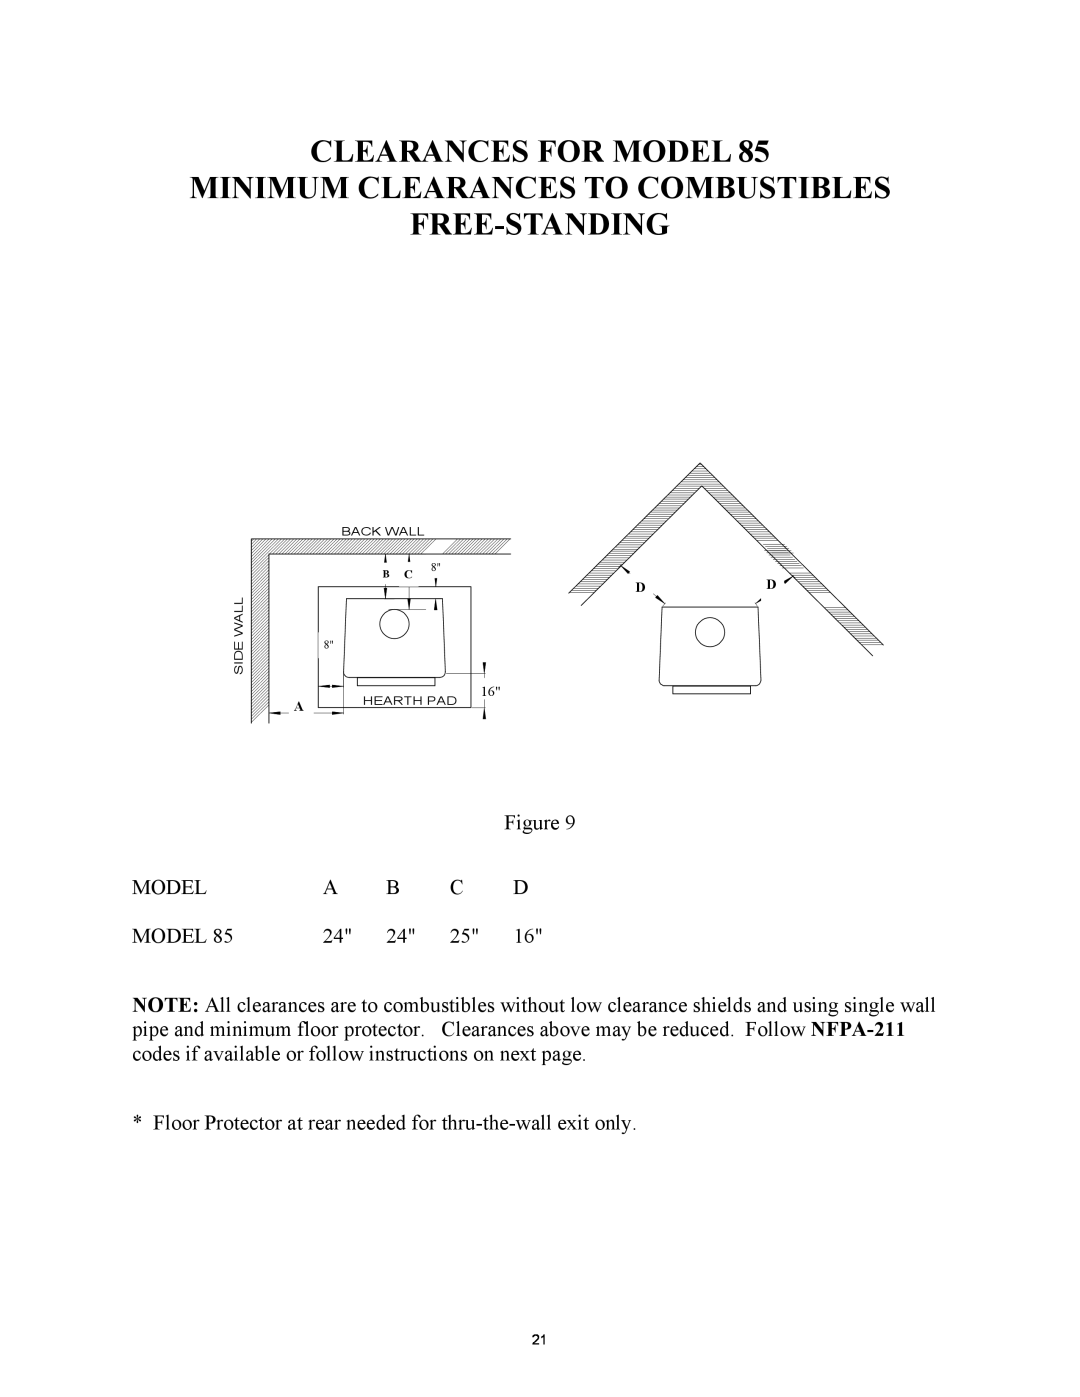 New Buck Corporation 85 installation instructions Clearances For Model, Minimum Clearances To Combustibles Free-Standing 